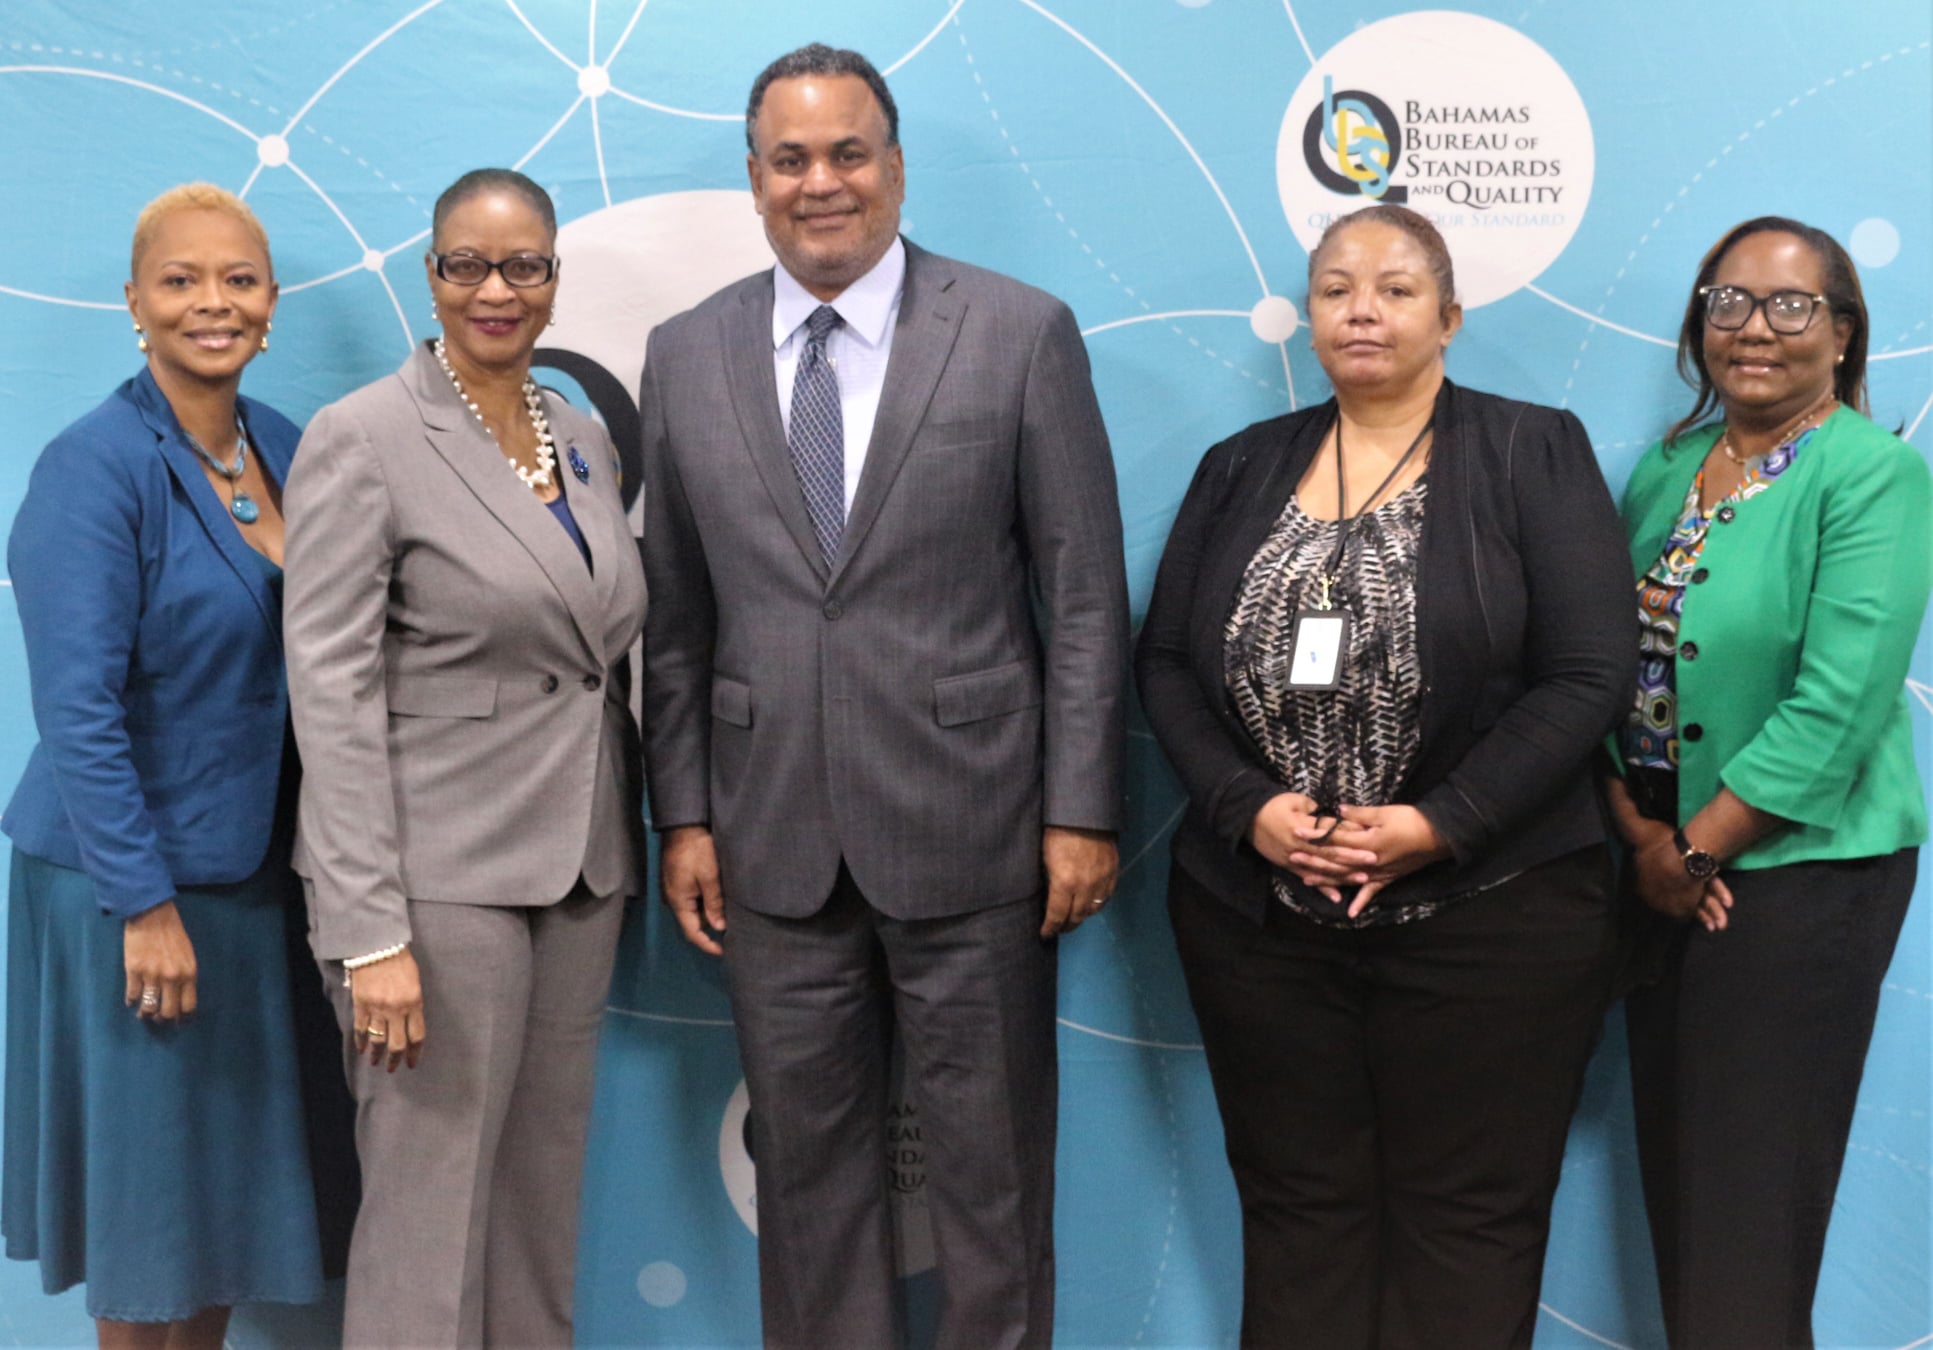 Minister Halkitis and team in Bahamas